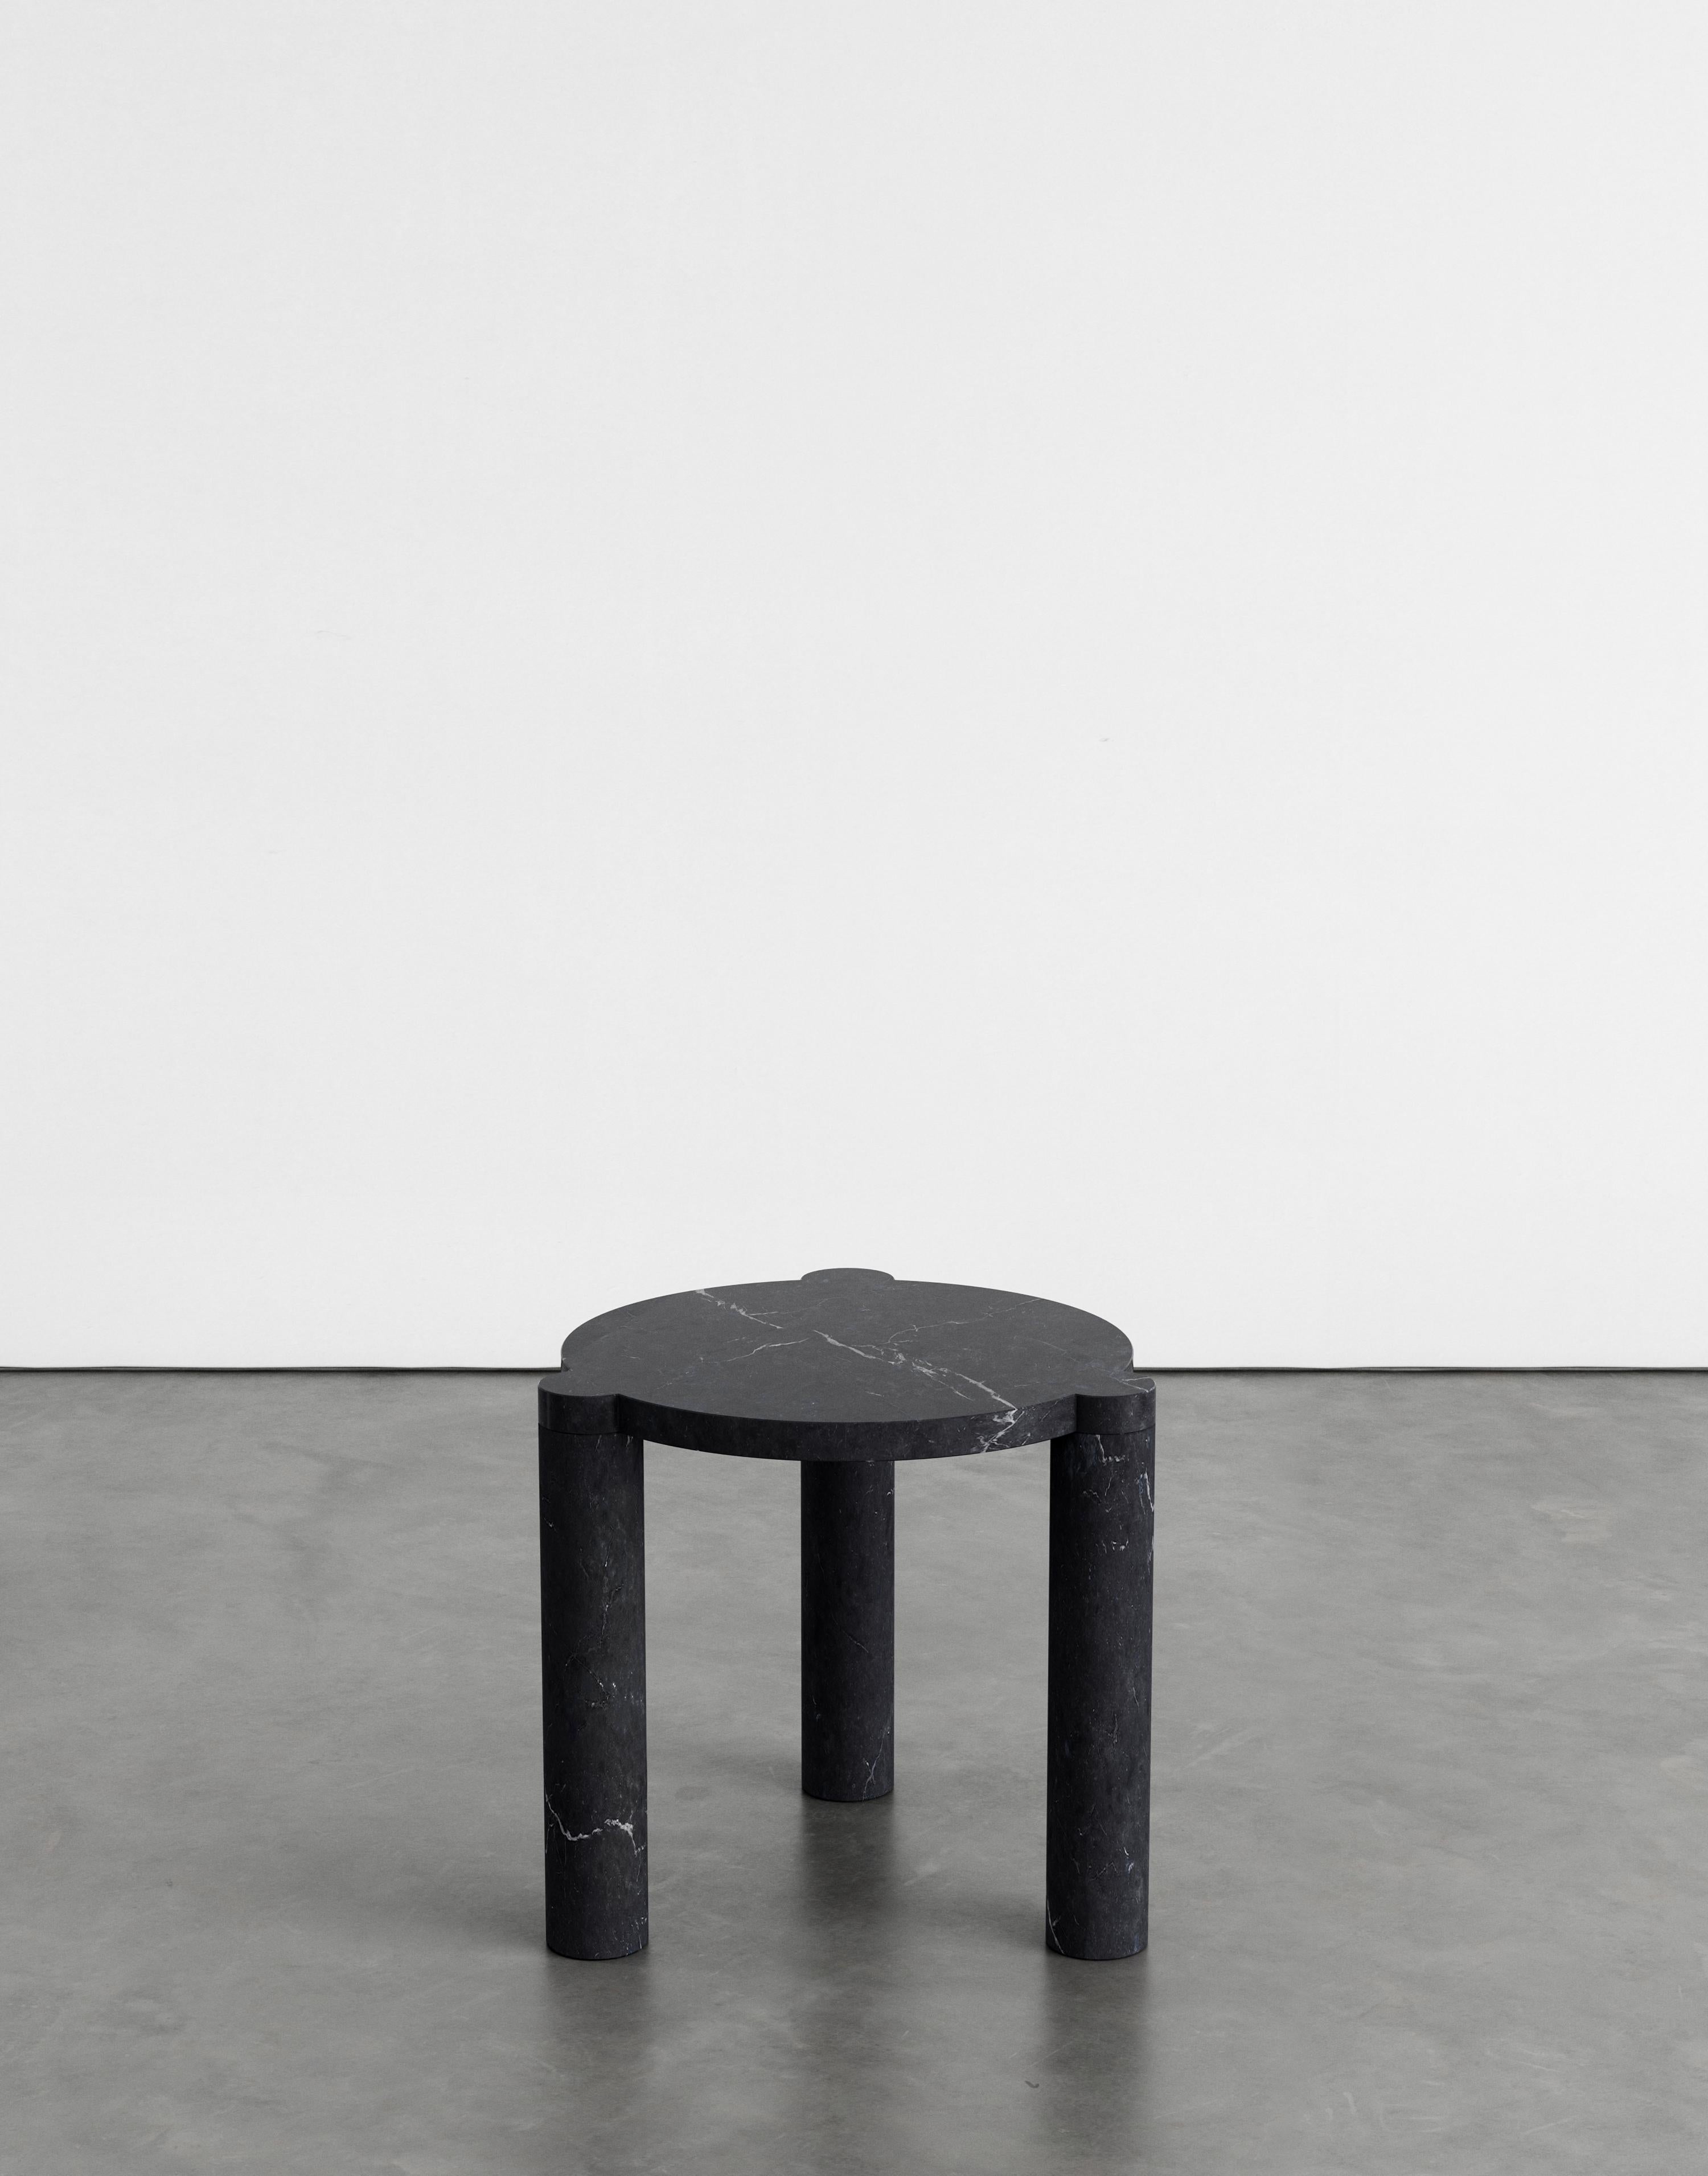 Alexis 45 side table by Agglomerati
Dimensions: D 45 x H 45 cm.
Materials: Nero Marquina marble.
Available in other stones. 

Alexis coffee table has off-set, cylindrical legs that curve flush underneath the tabletop, providing a soft release and